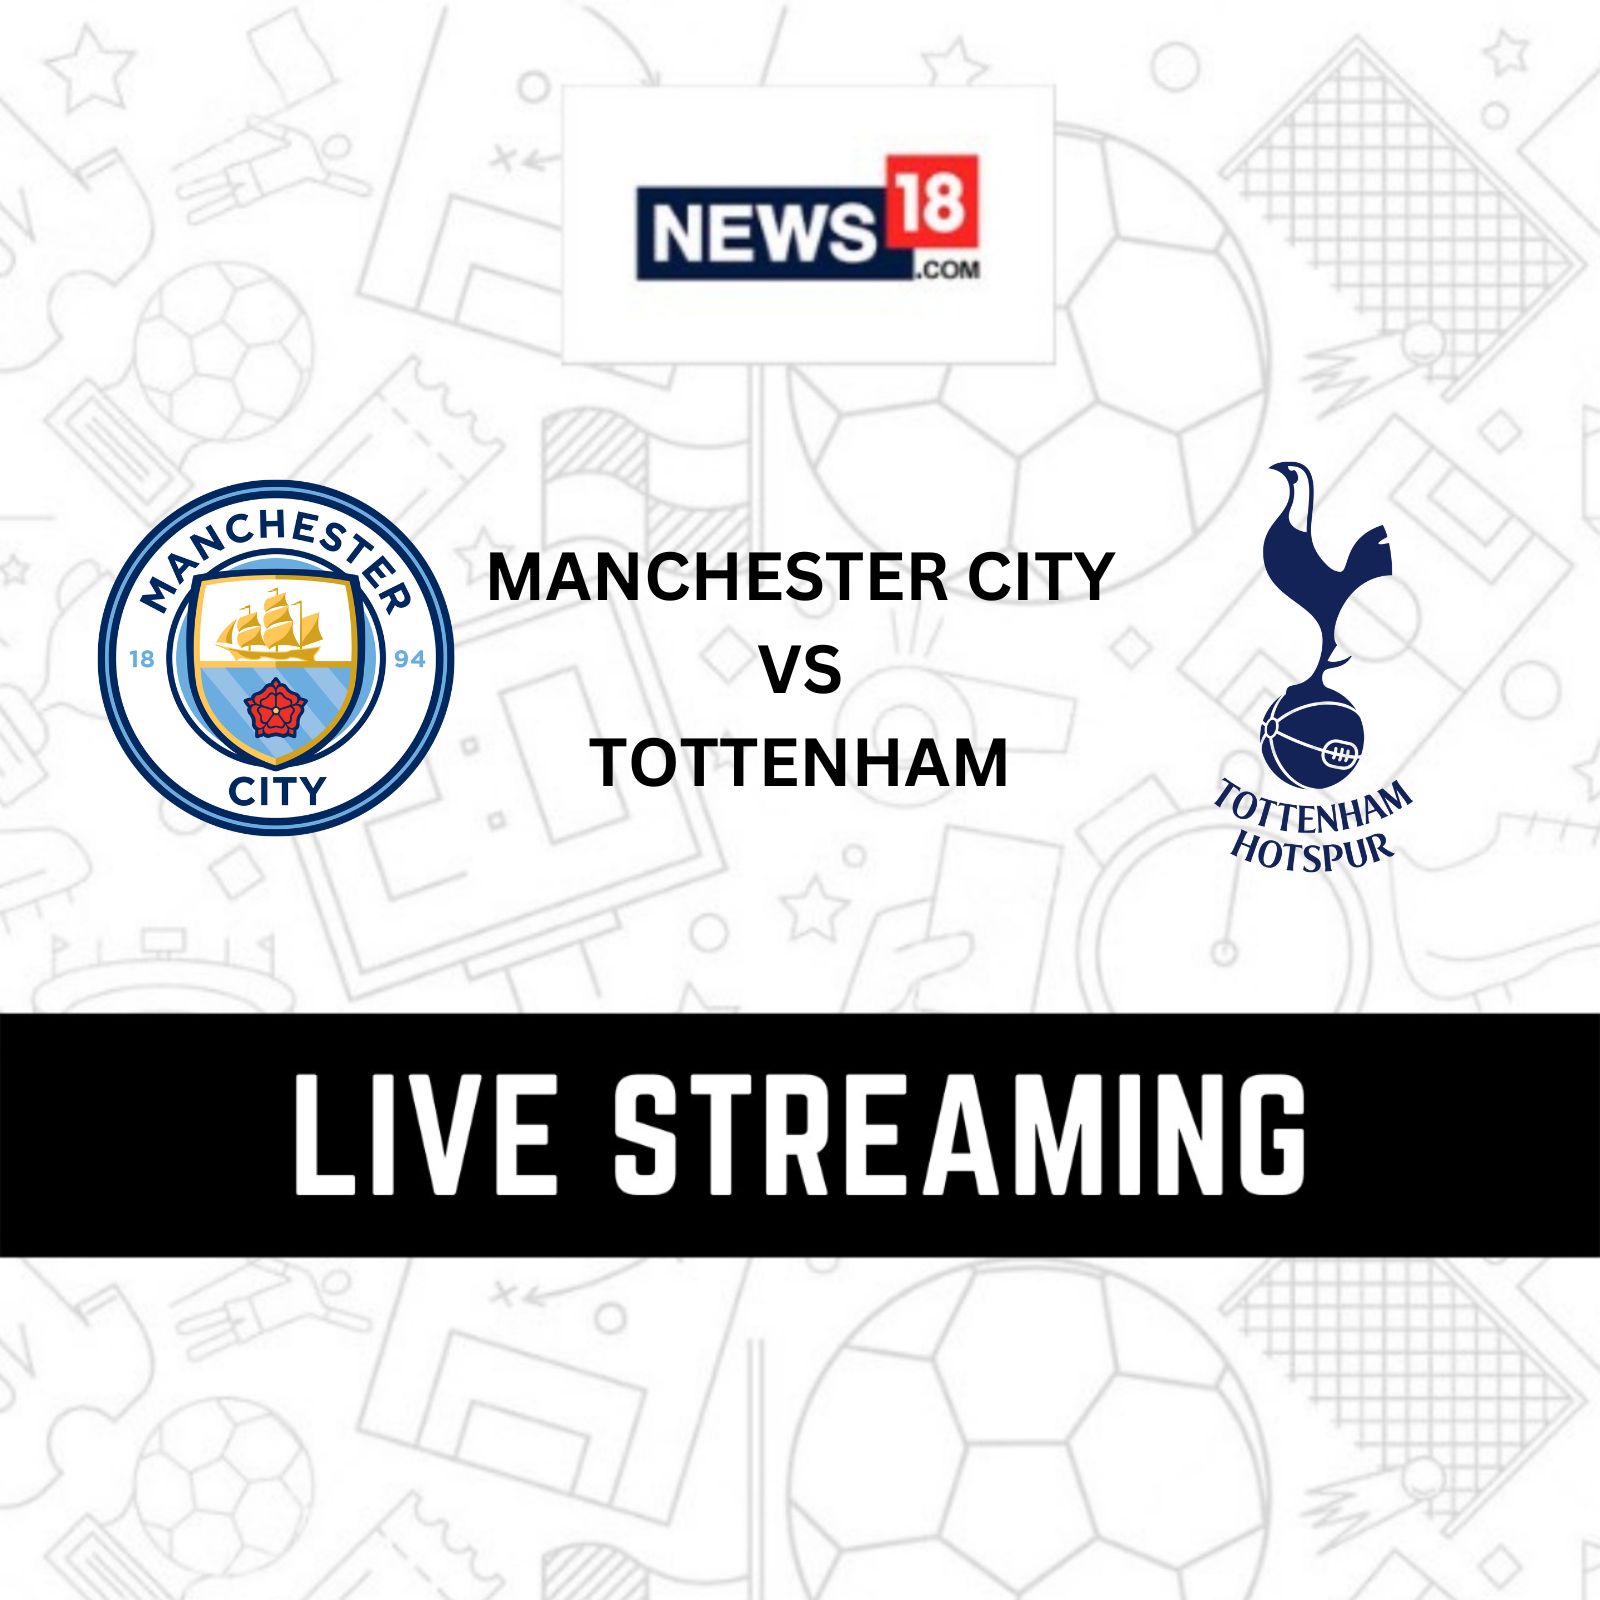 Manchester City vs Tottenham Hotspur Premier League Live Streaming When and Where to Watch Manchester City vs Tottenham Hotspur Live?